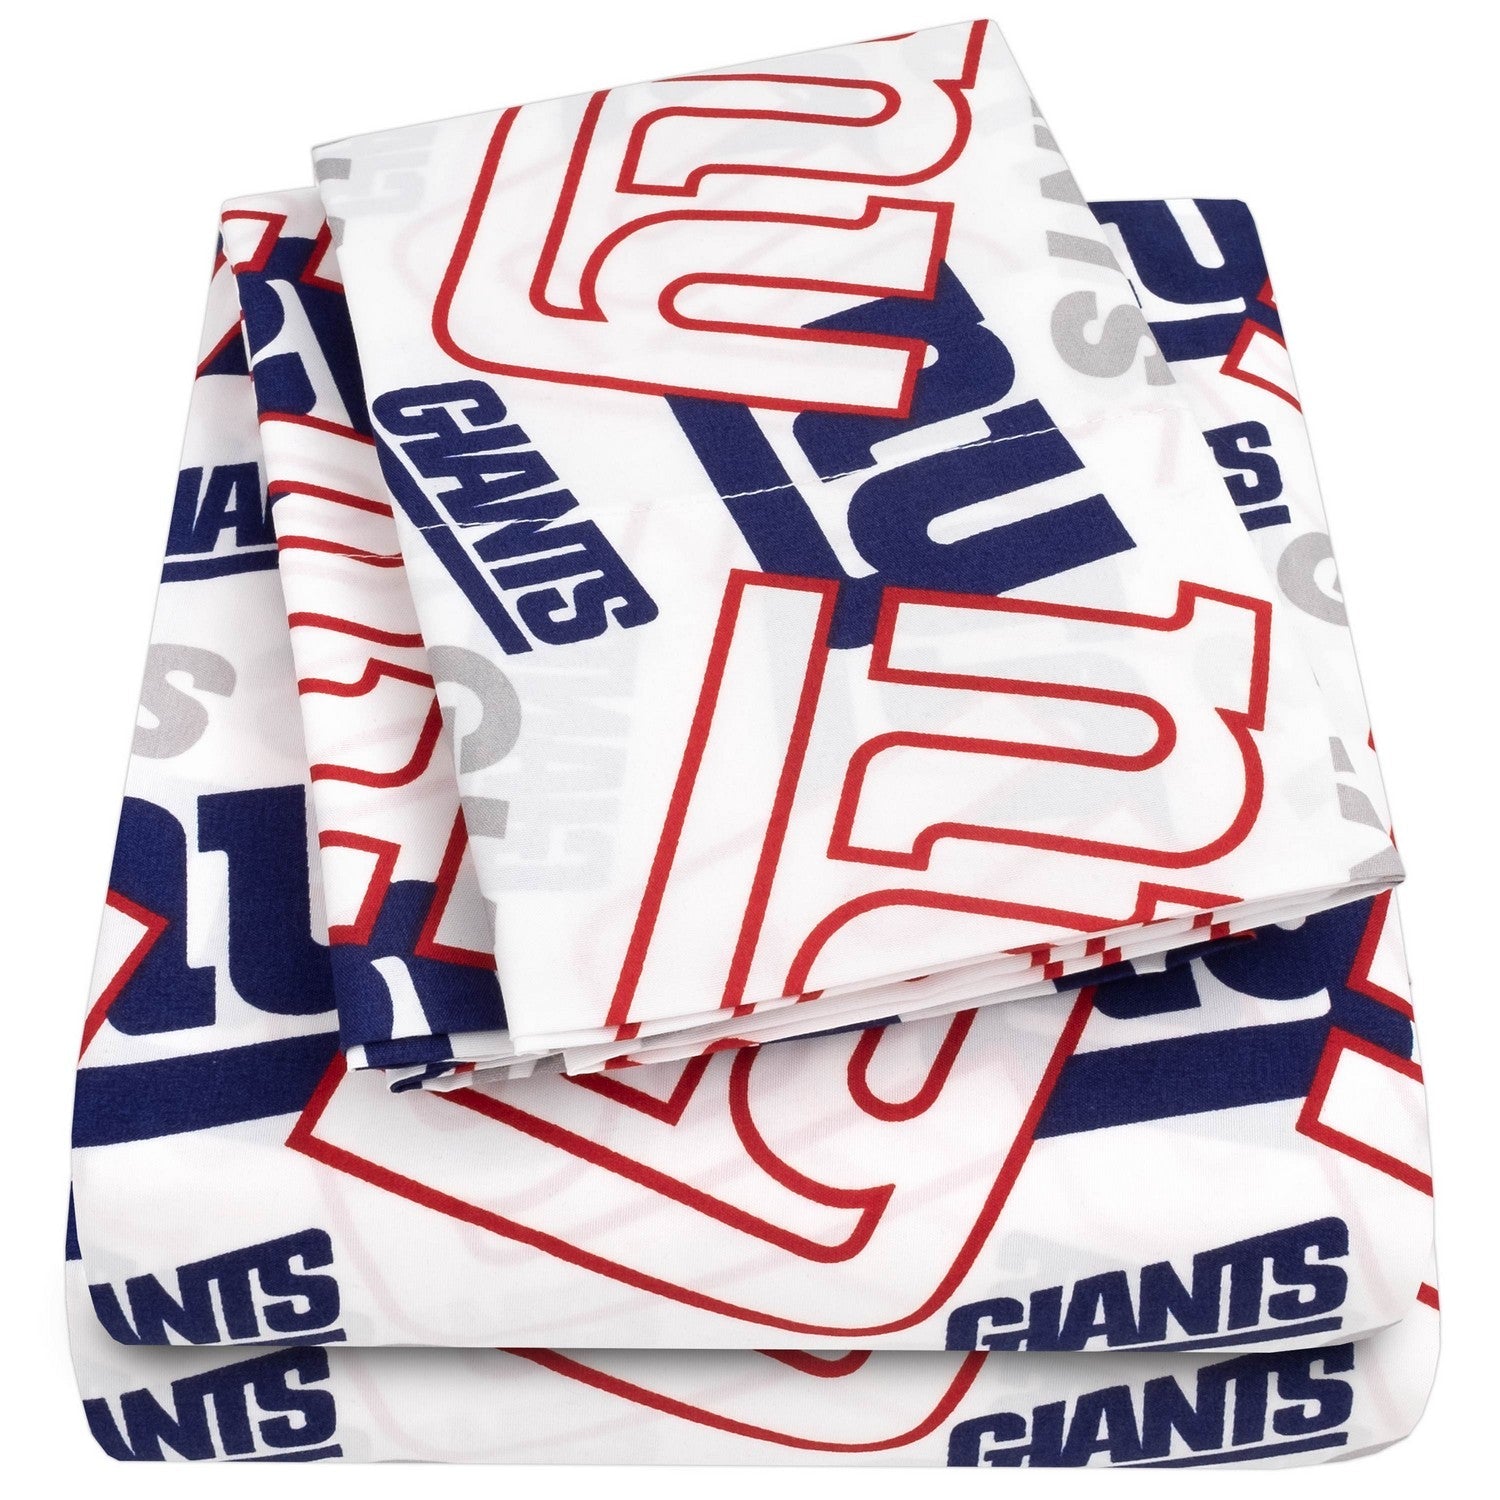 New York Giants NFL Officially Licensed 4-Piece Sheet Set - Folded